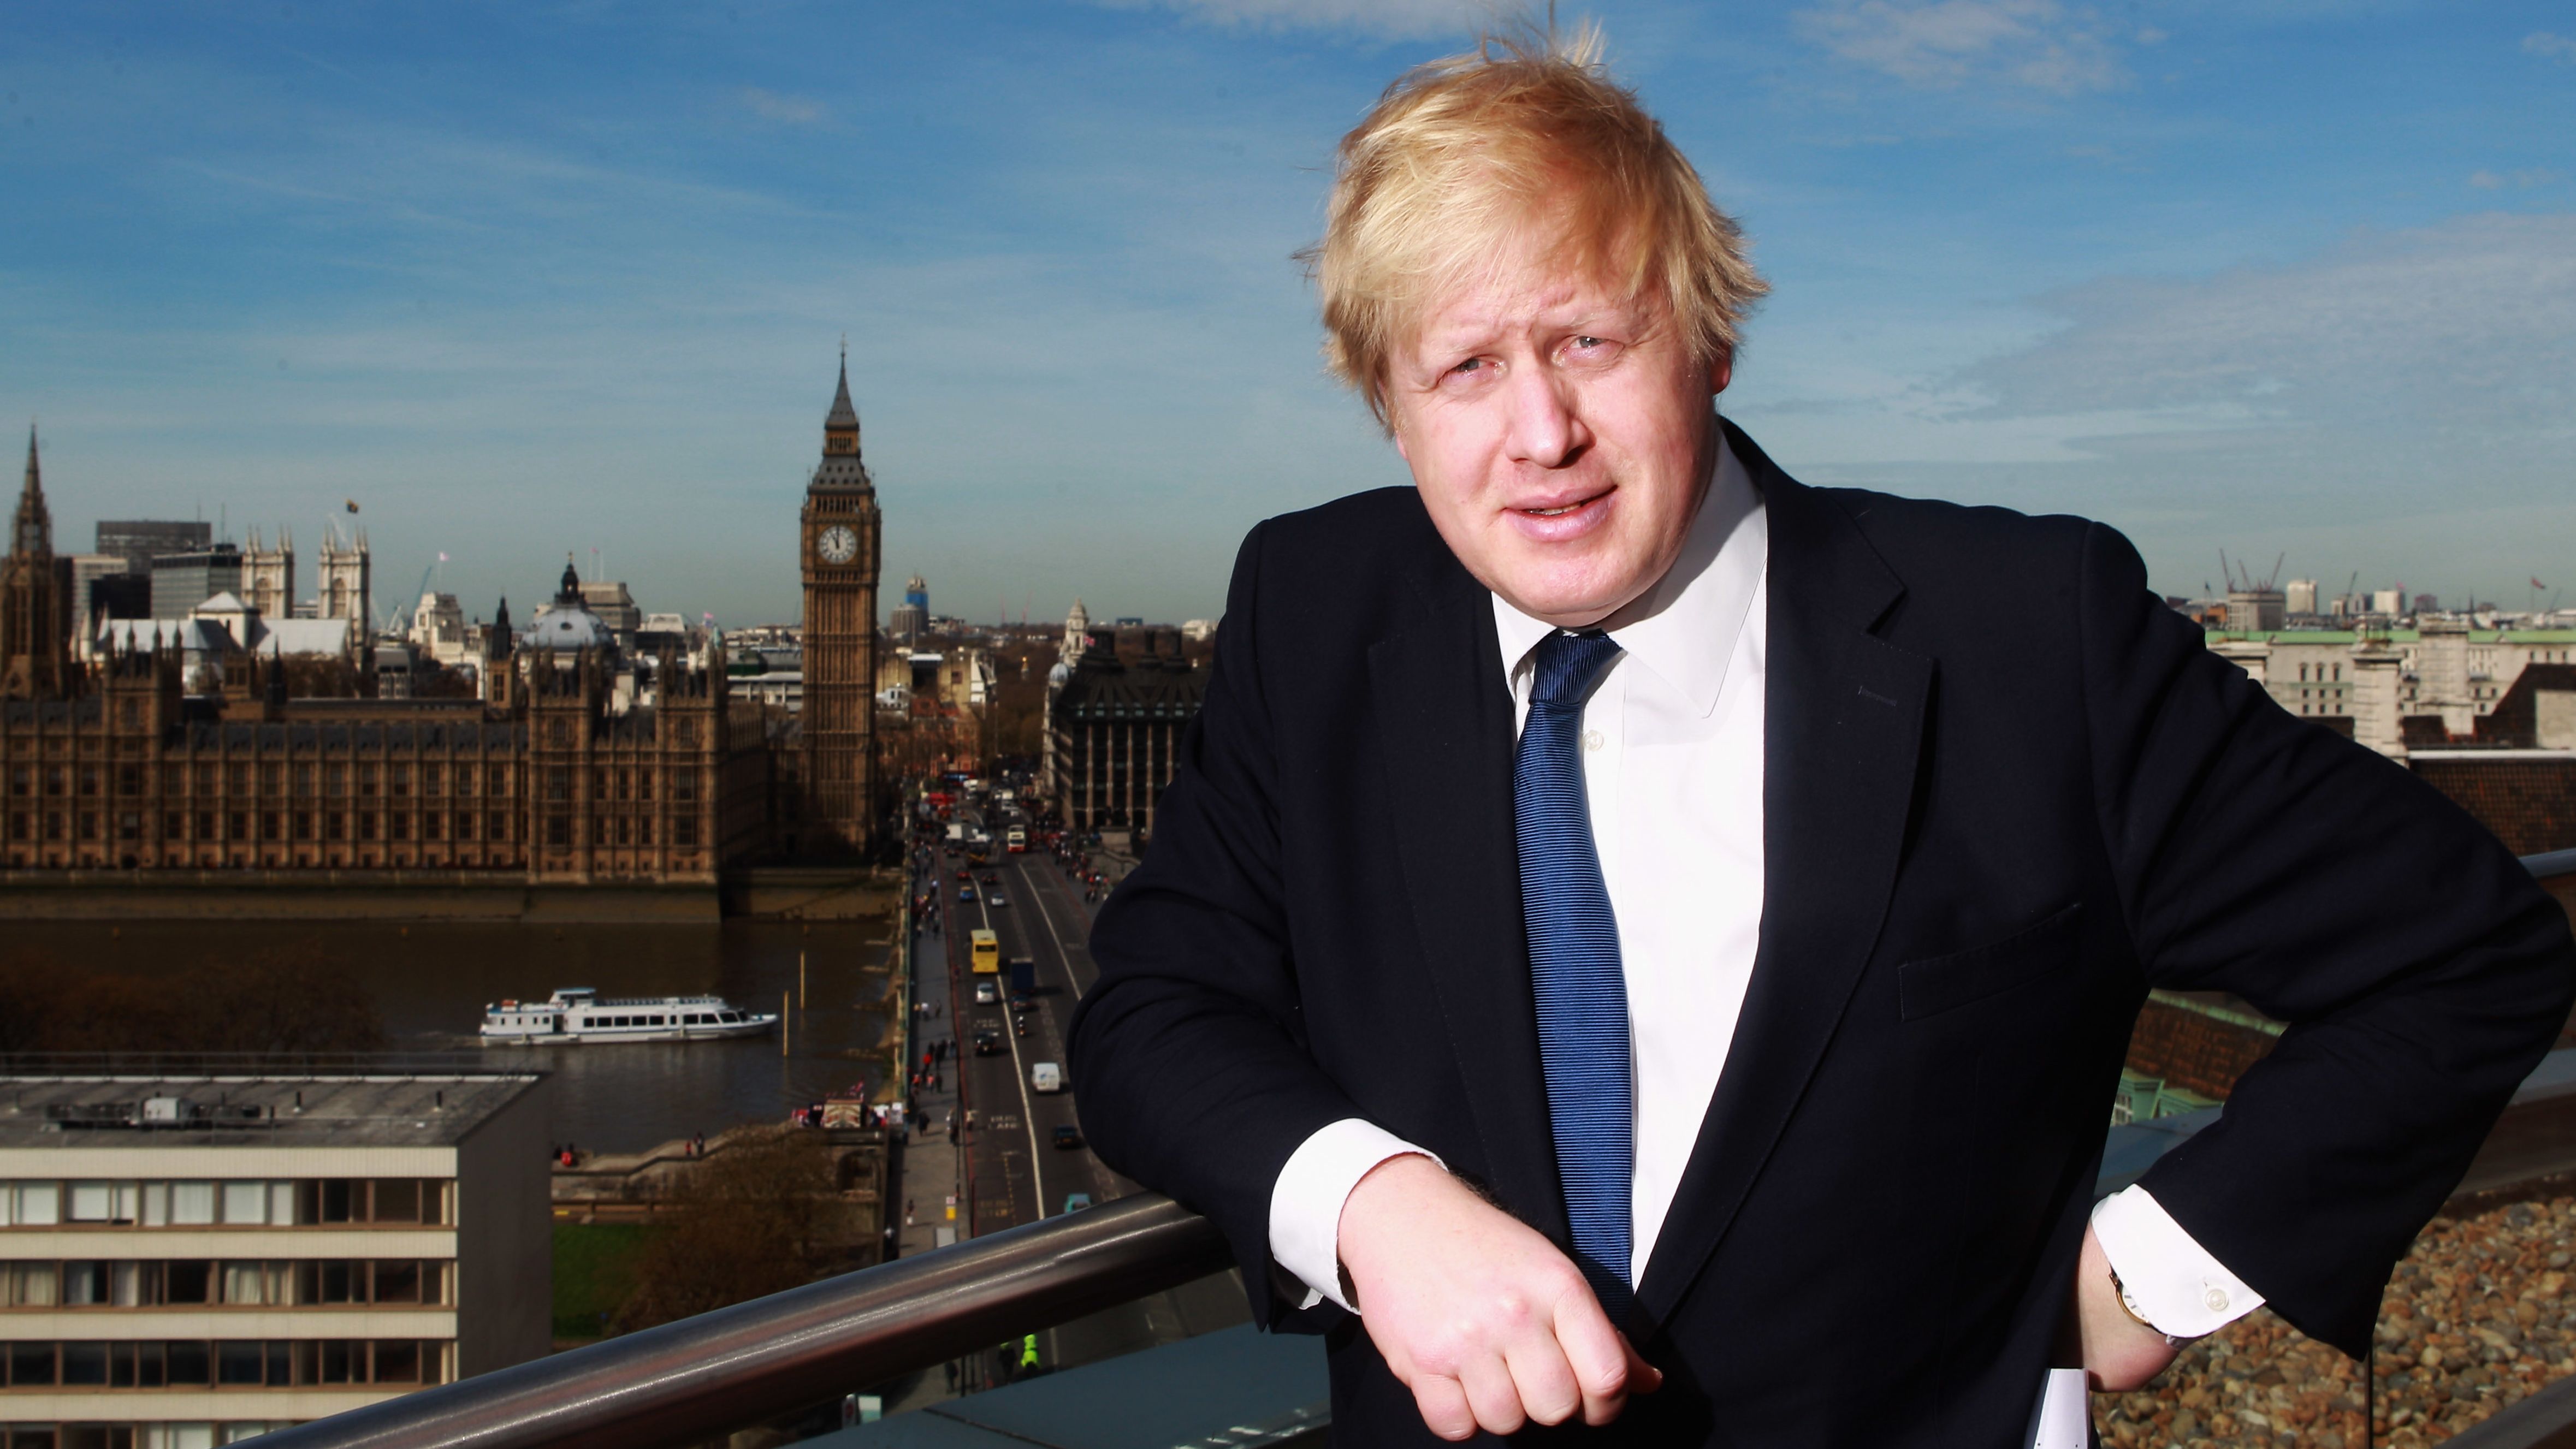 Johnson poses for a photo in London in April 2011. He was re-elected as the city's mayor in 2012.